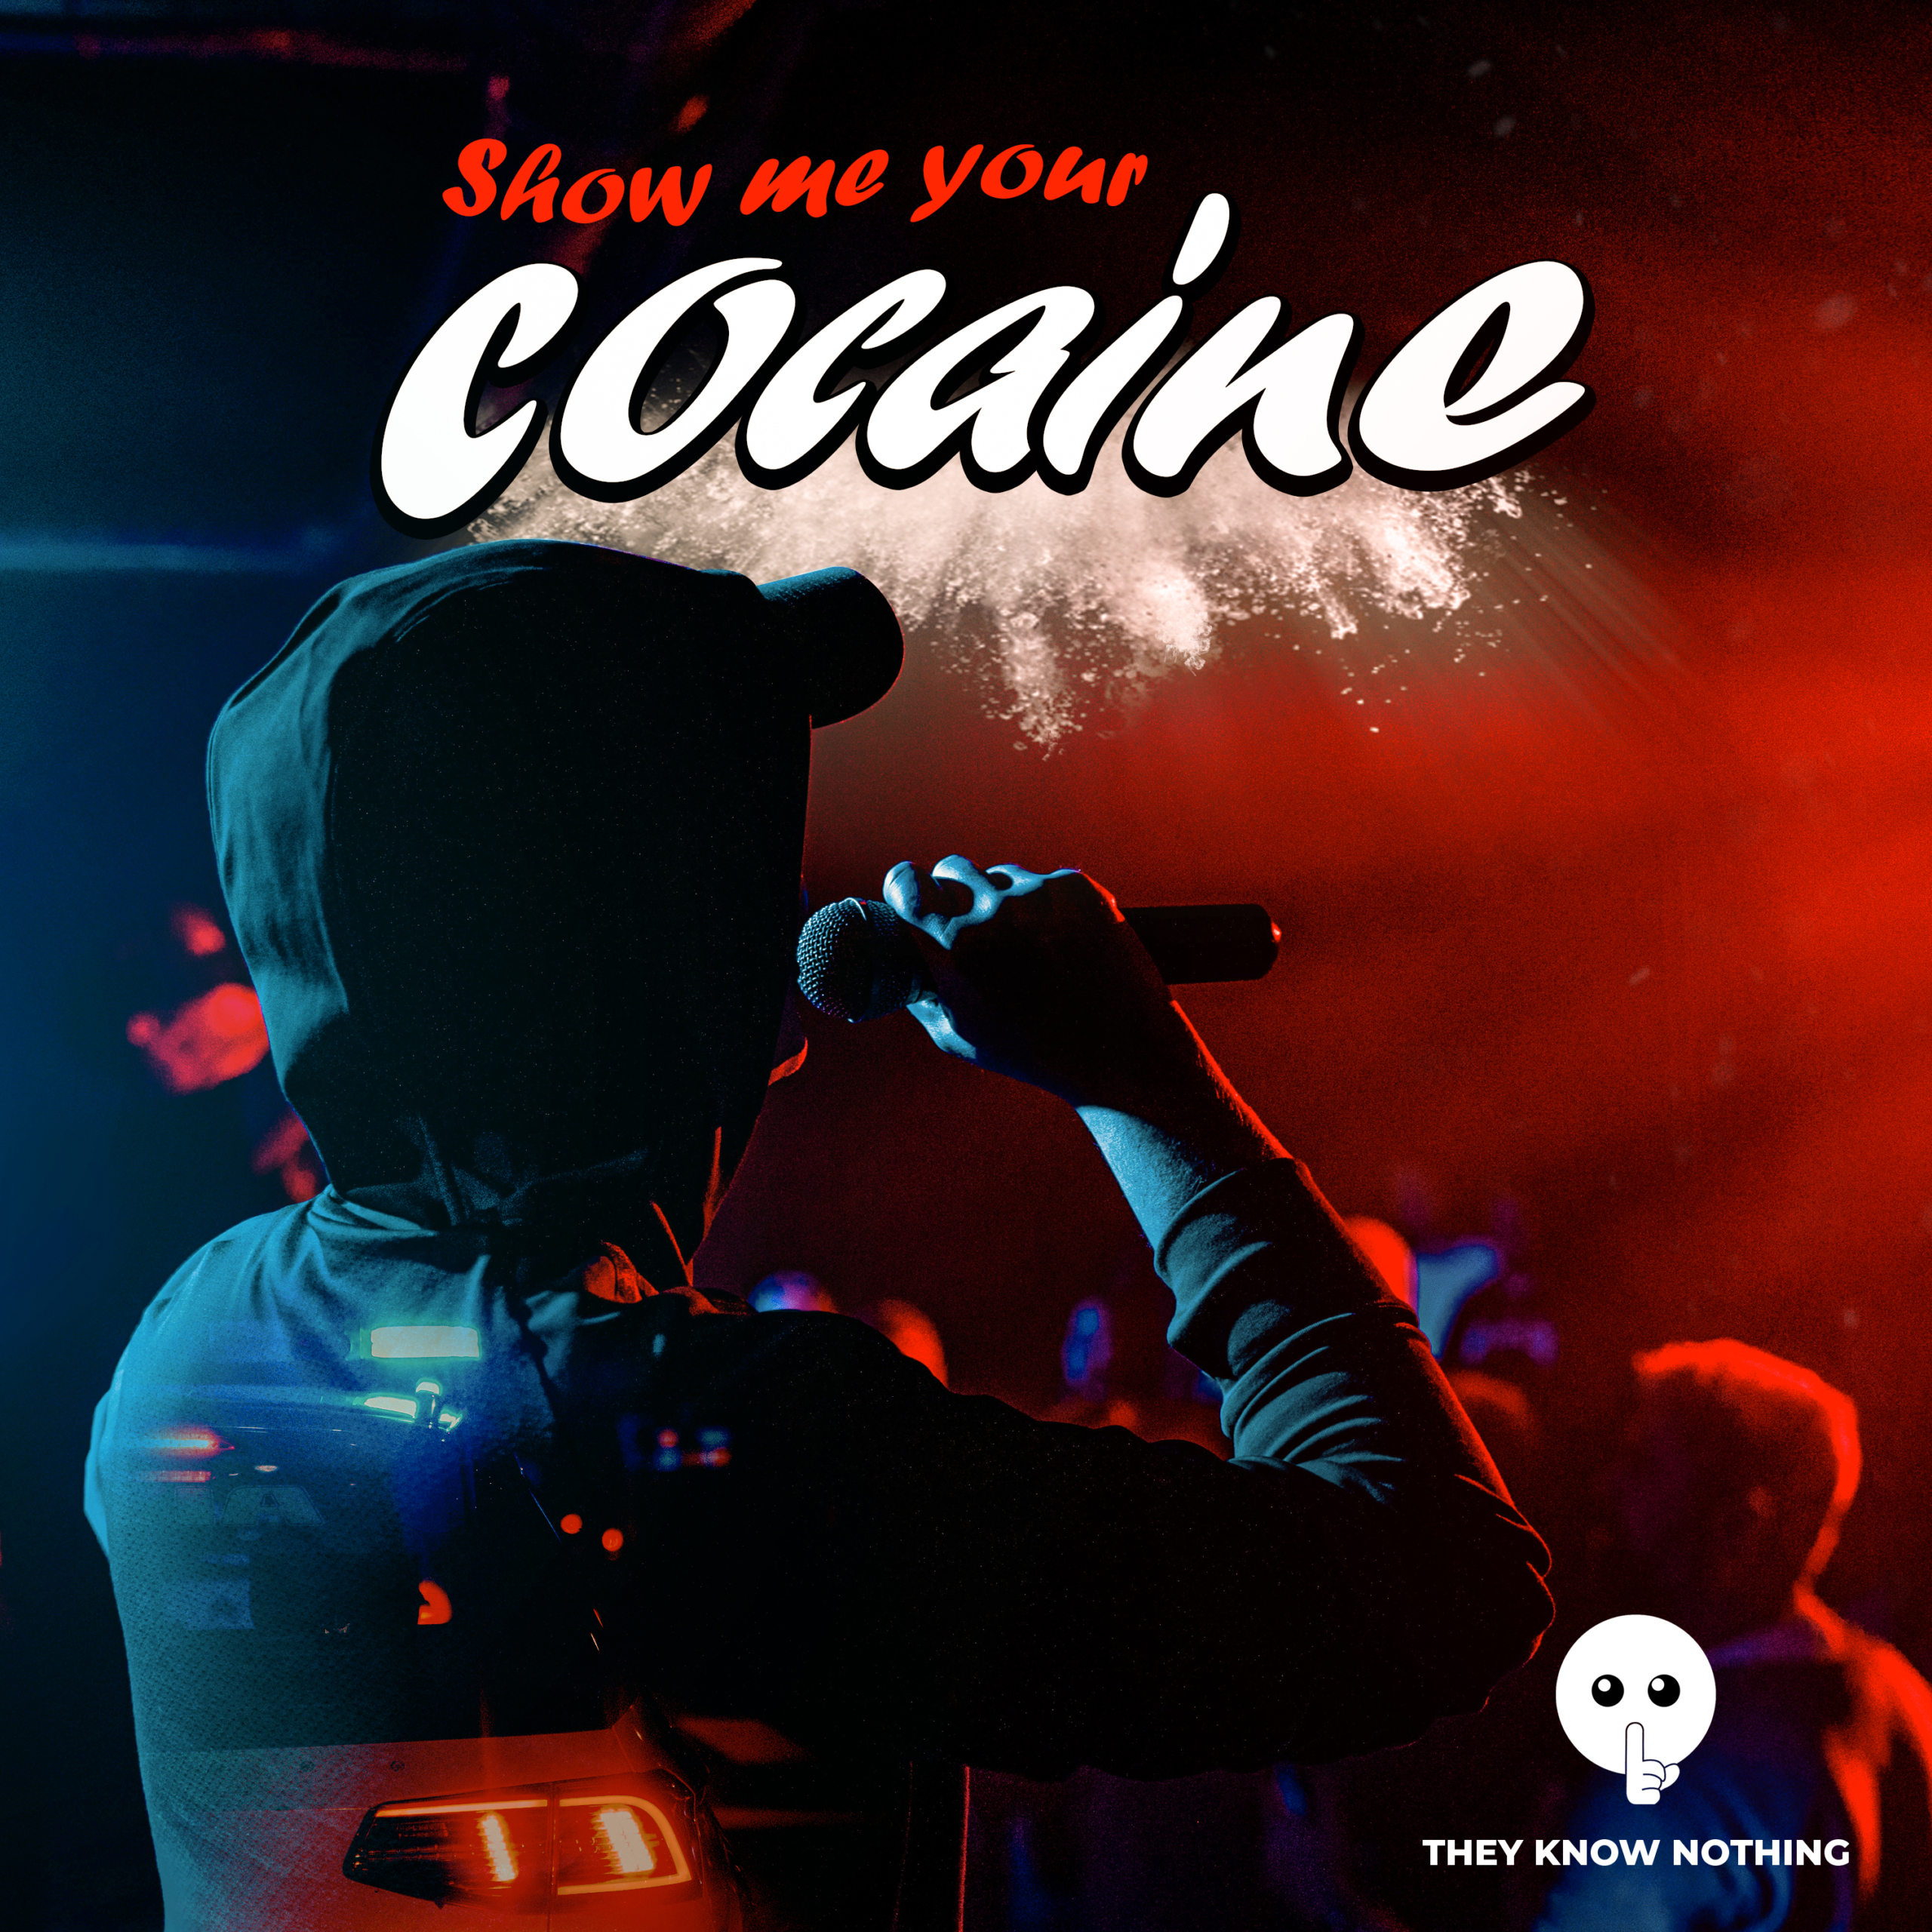 They Know Nothing - Show me your cocaine